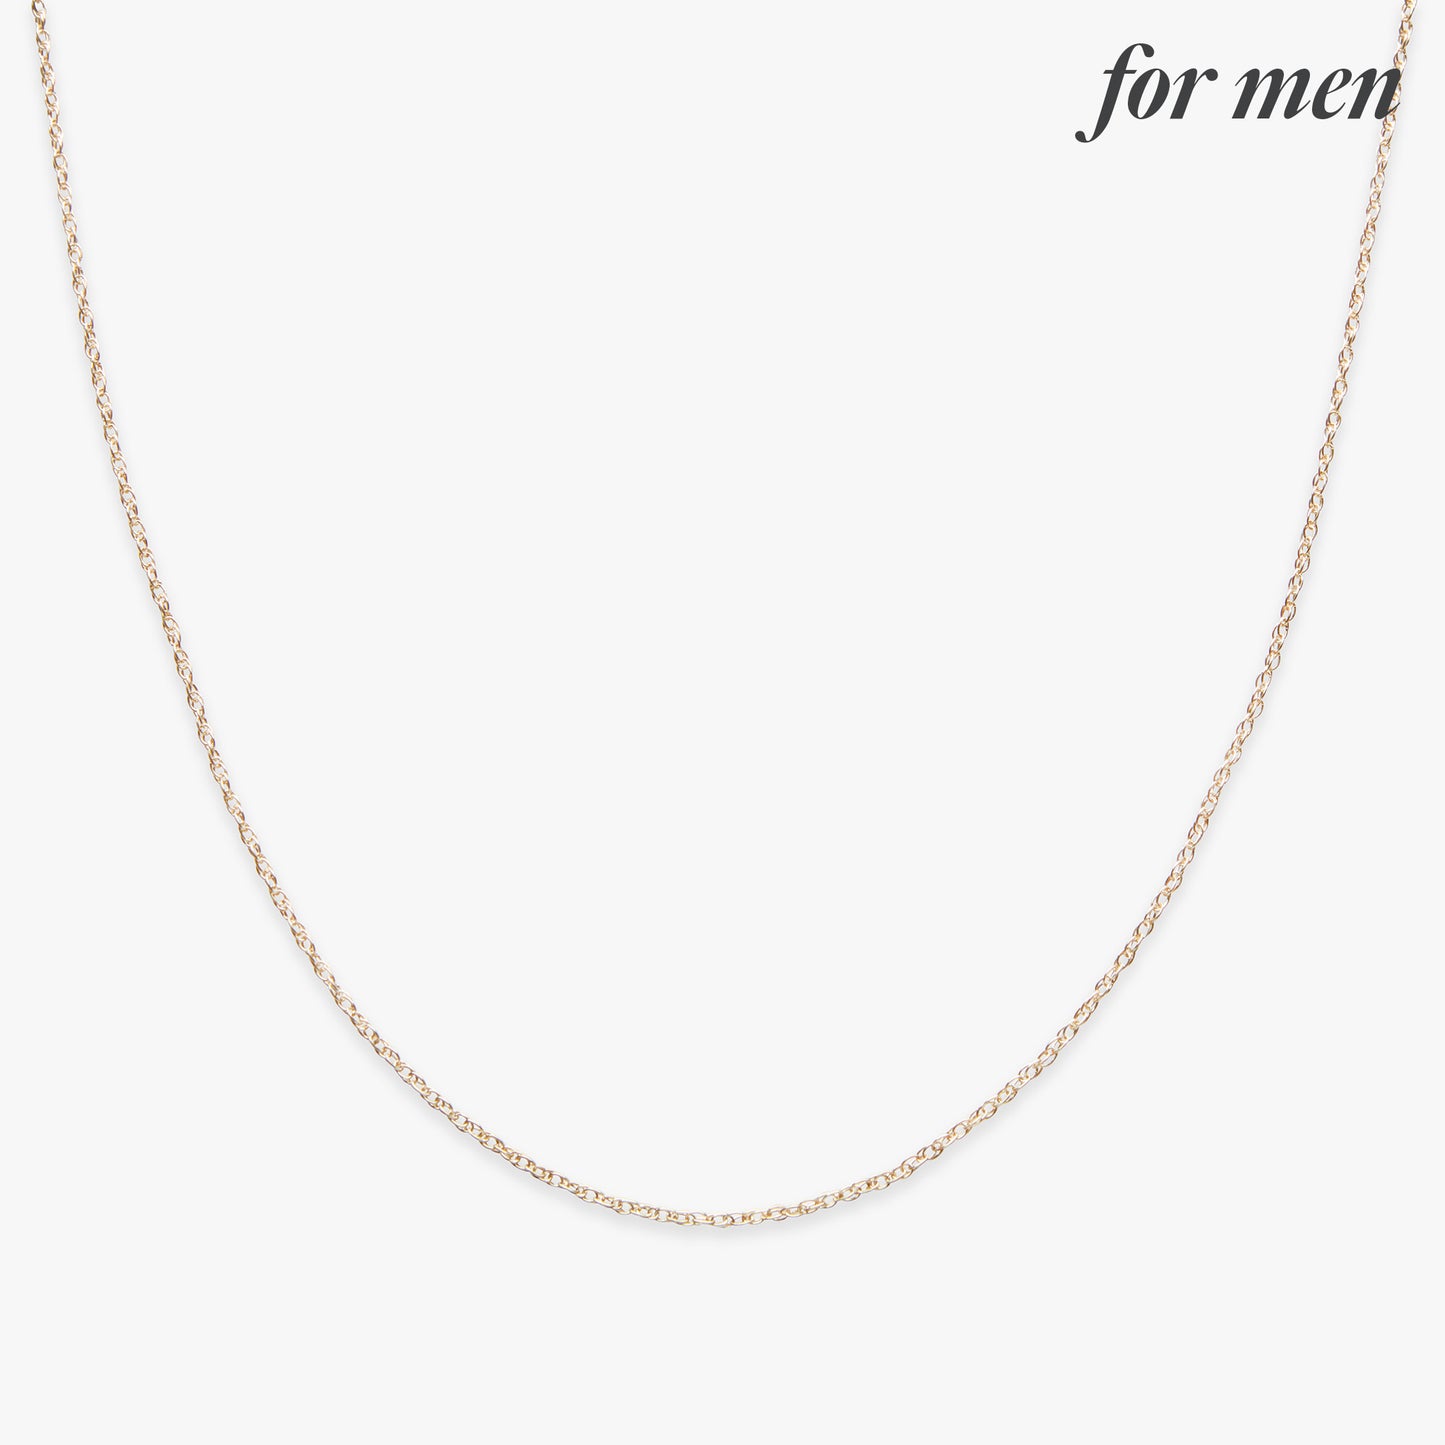 Basic twist chain necklace gold filled for men